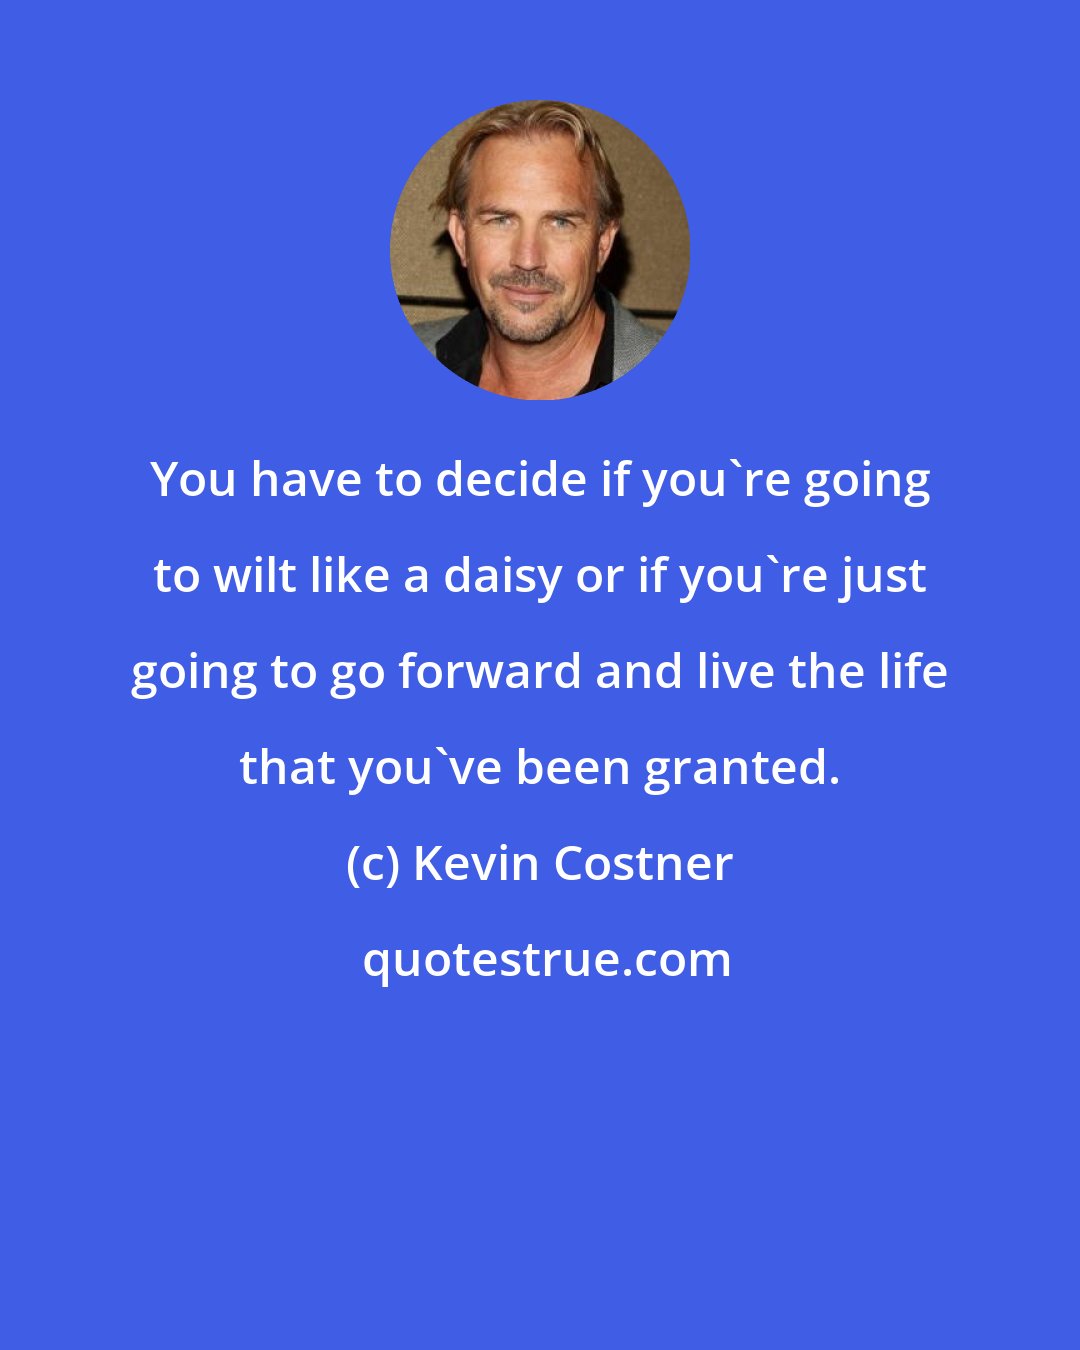 Kevin Costner: You have to decide if you're going to wilt like a daisy or if you're just going to go forward and live the life that you've been granted.